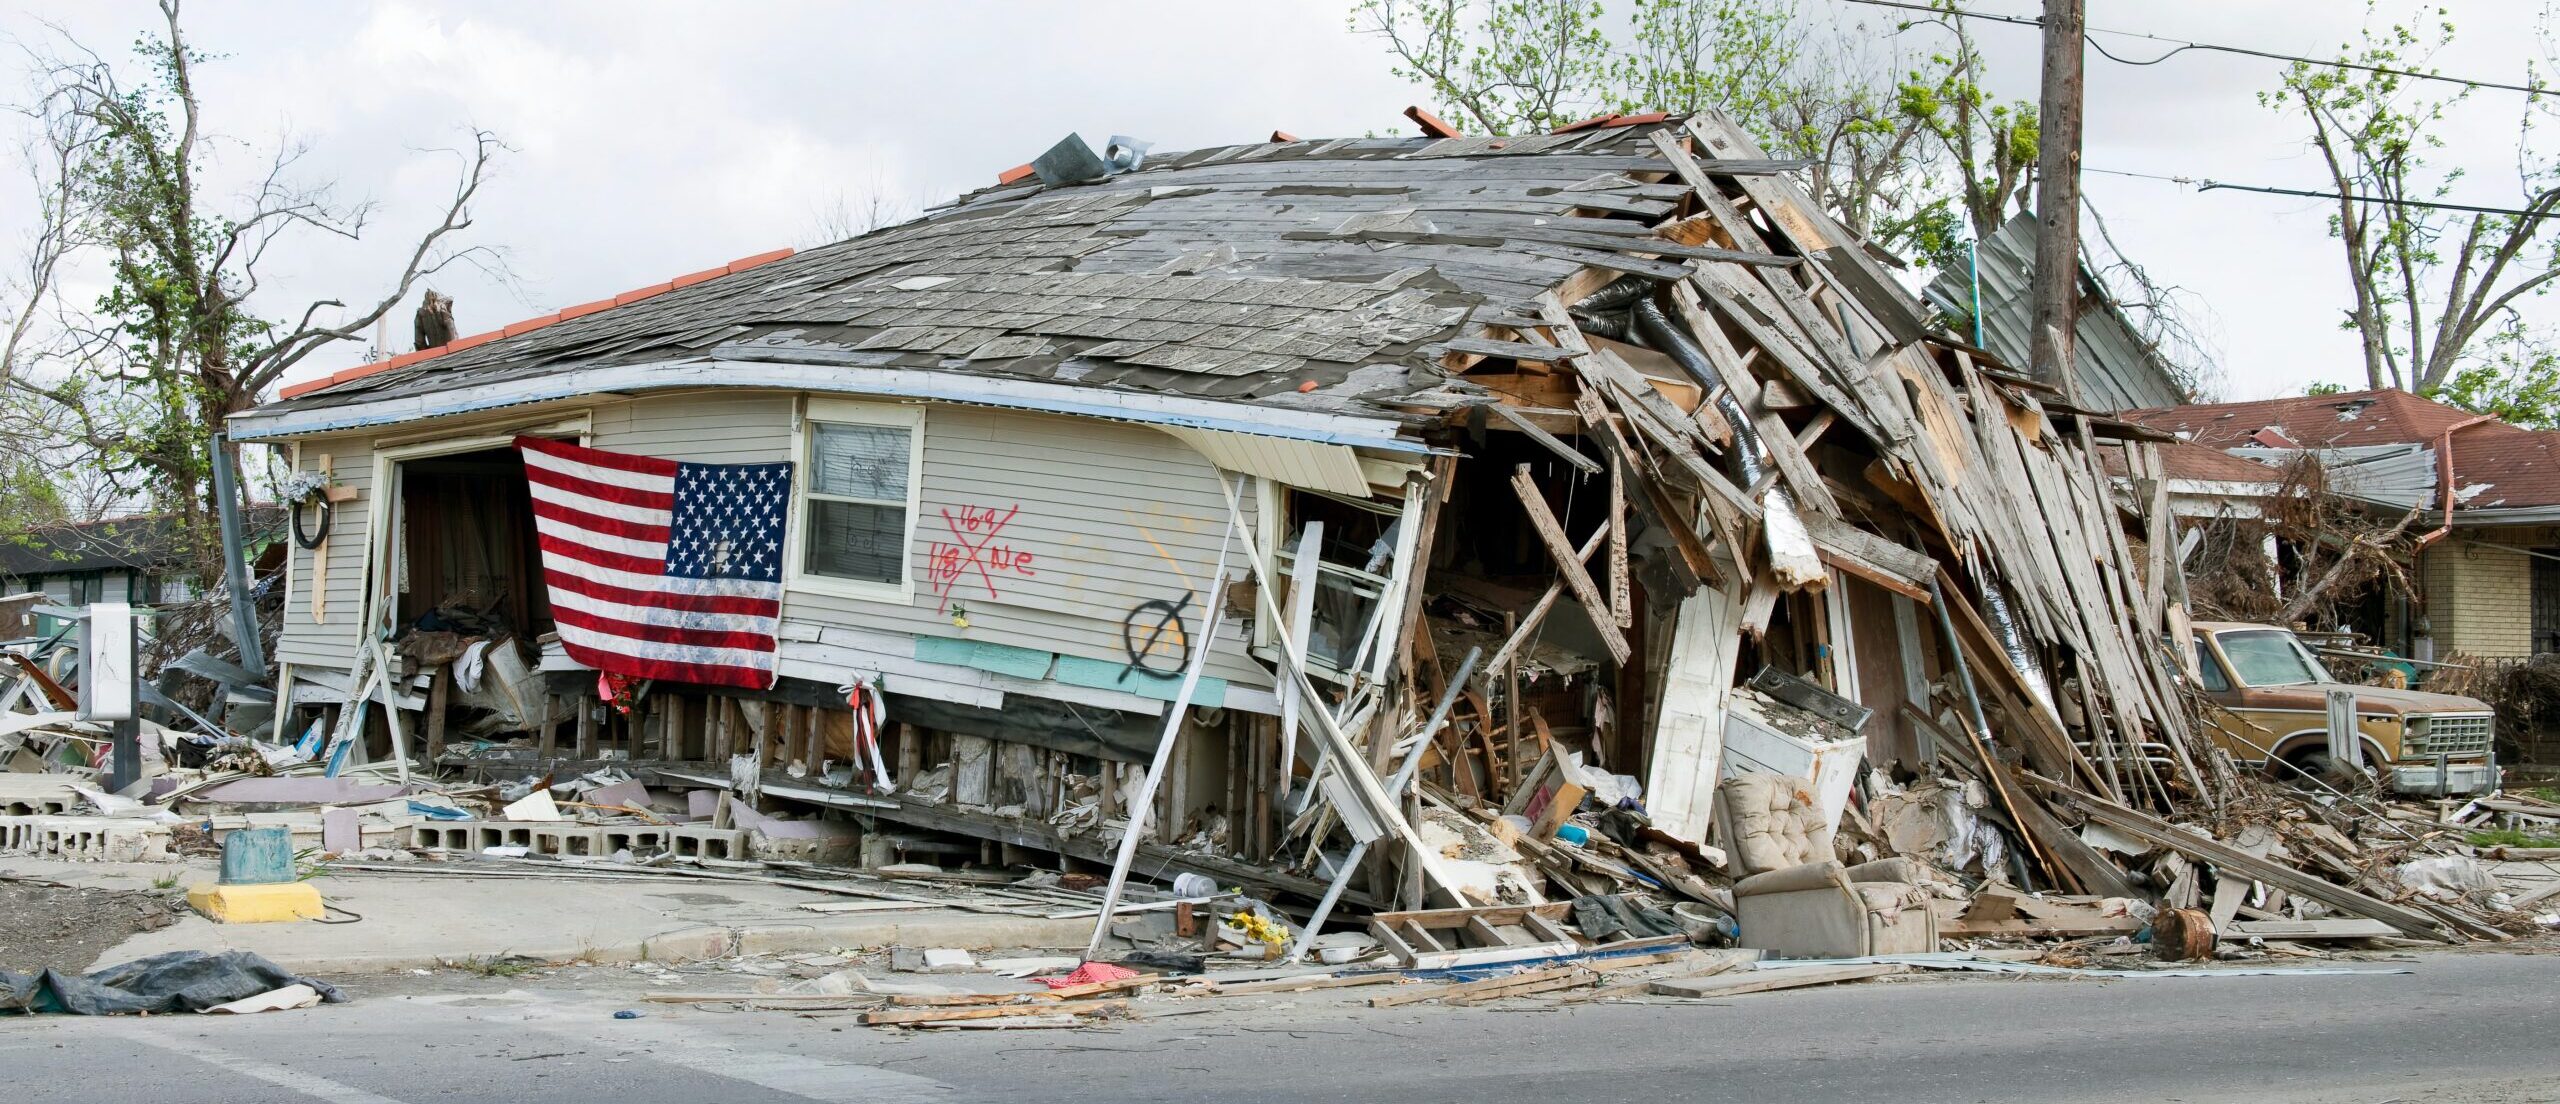 A destroyed home displays an American flag.